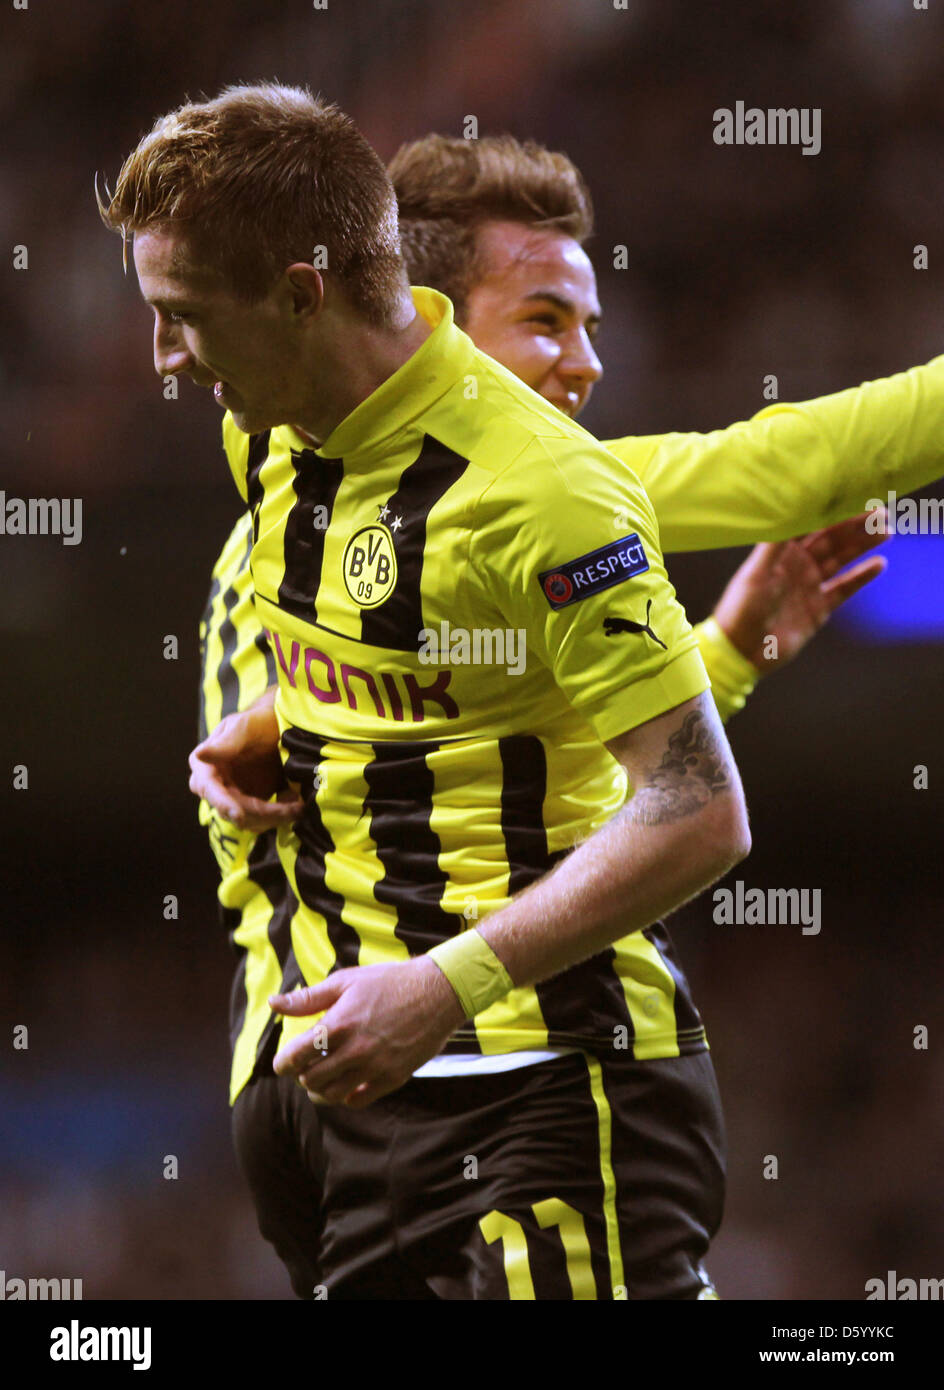 Dortmund's Marco Reus (l) celebrates his 1-0 goal with Mario Goetze during the Champions League Group D soccer match between Real Madrid and Borussia Dortmund at the Santiago Bernabeu Stadium in Madrid, Spain, 6 November 2012. Photo: Fabian Stratenschulte/dpa  +++(c) dpa - Bildfunk+++ Stock Photo